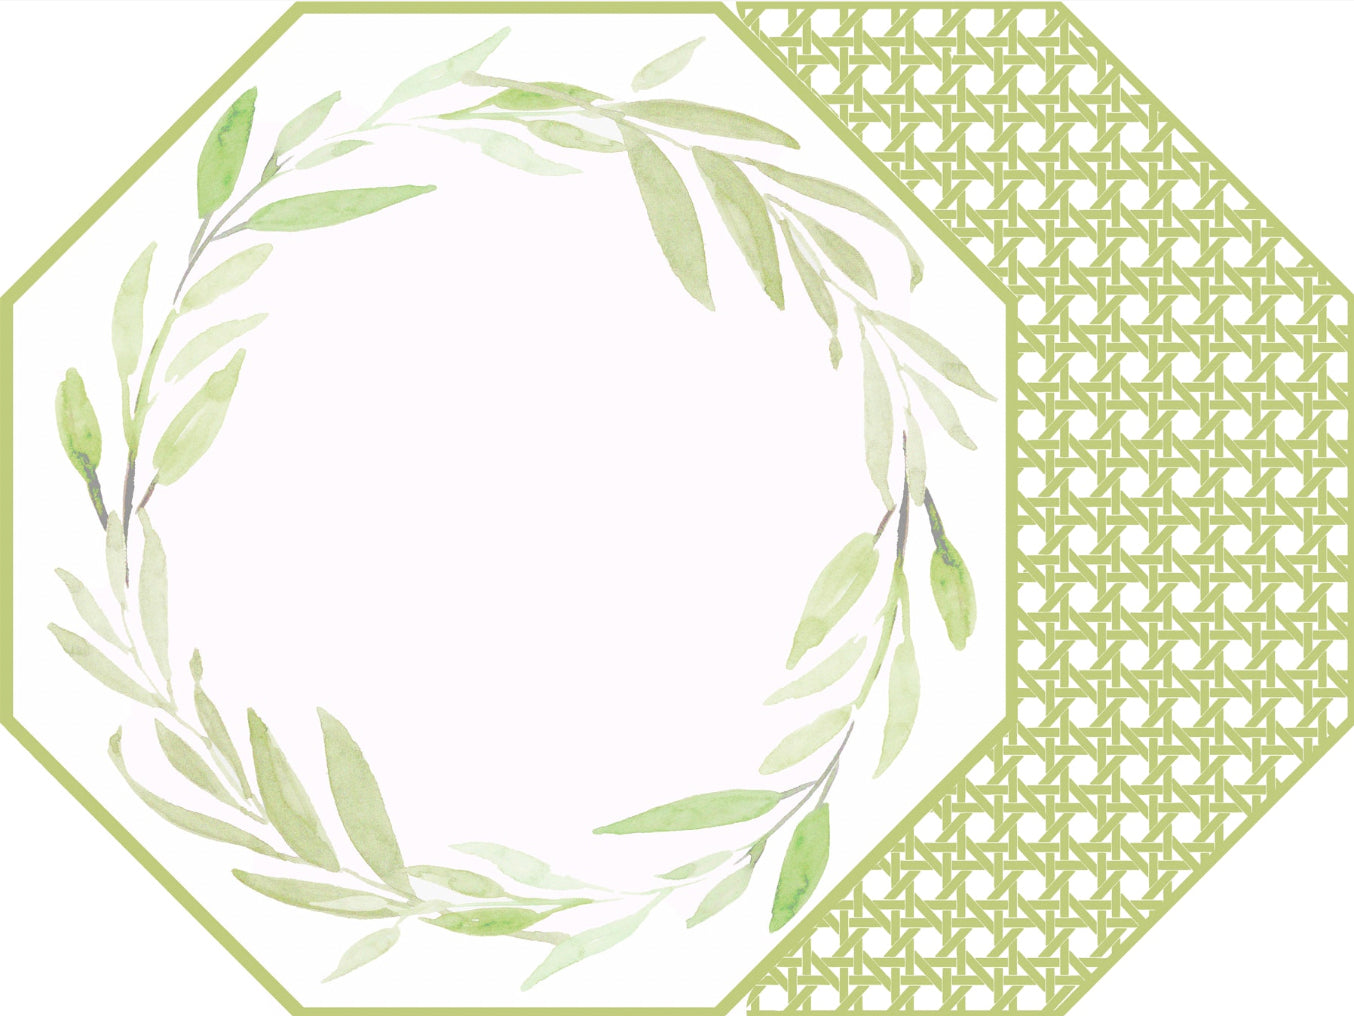 OCTAGONAL TWO SIDED LEAVES WREATH PLACEMAT WITH CANE ~ LIME